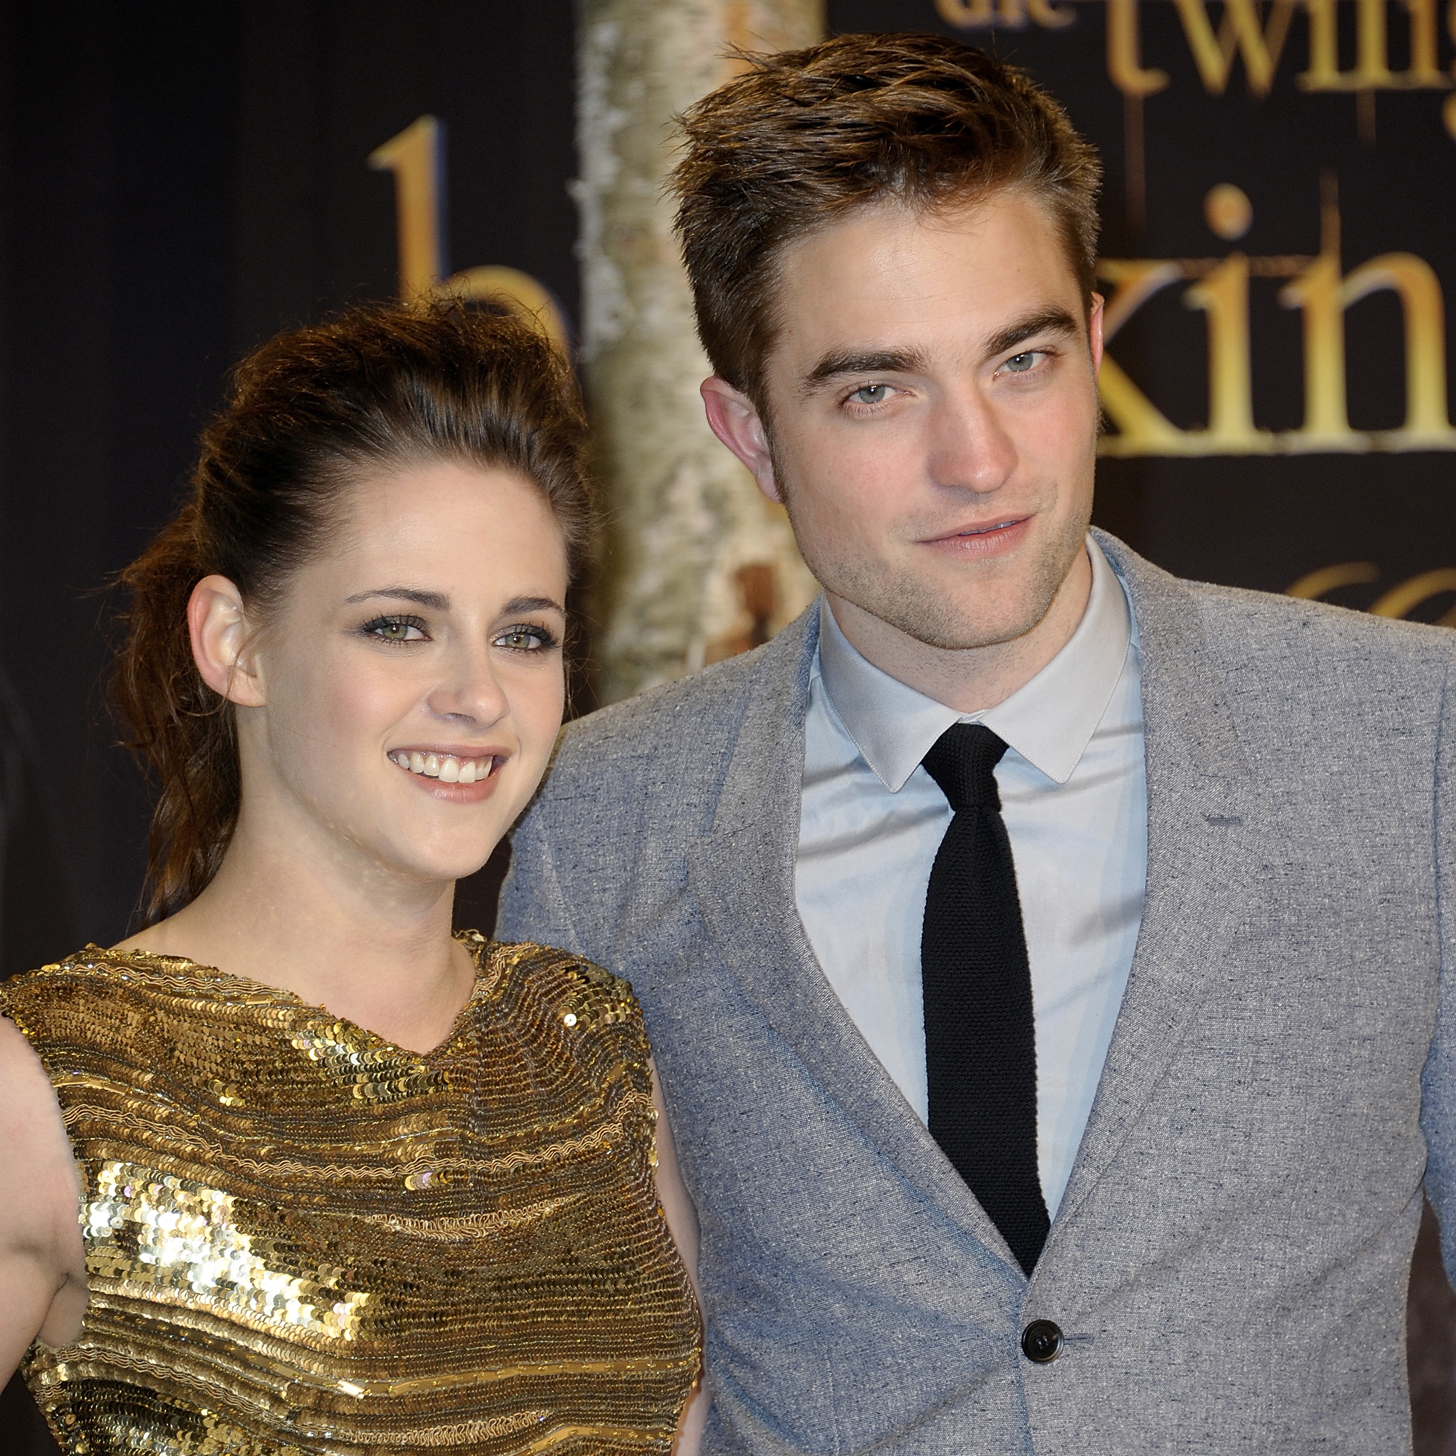 Rob and Kristen